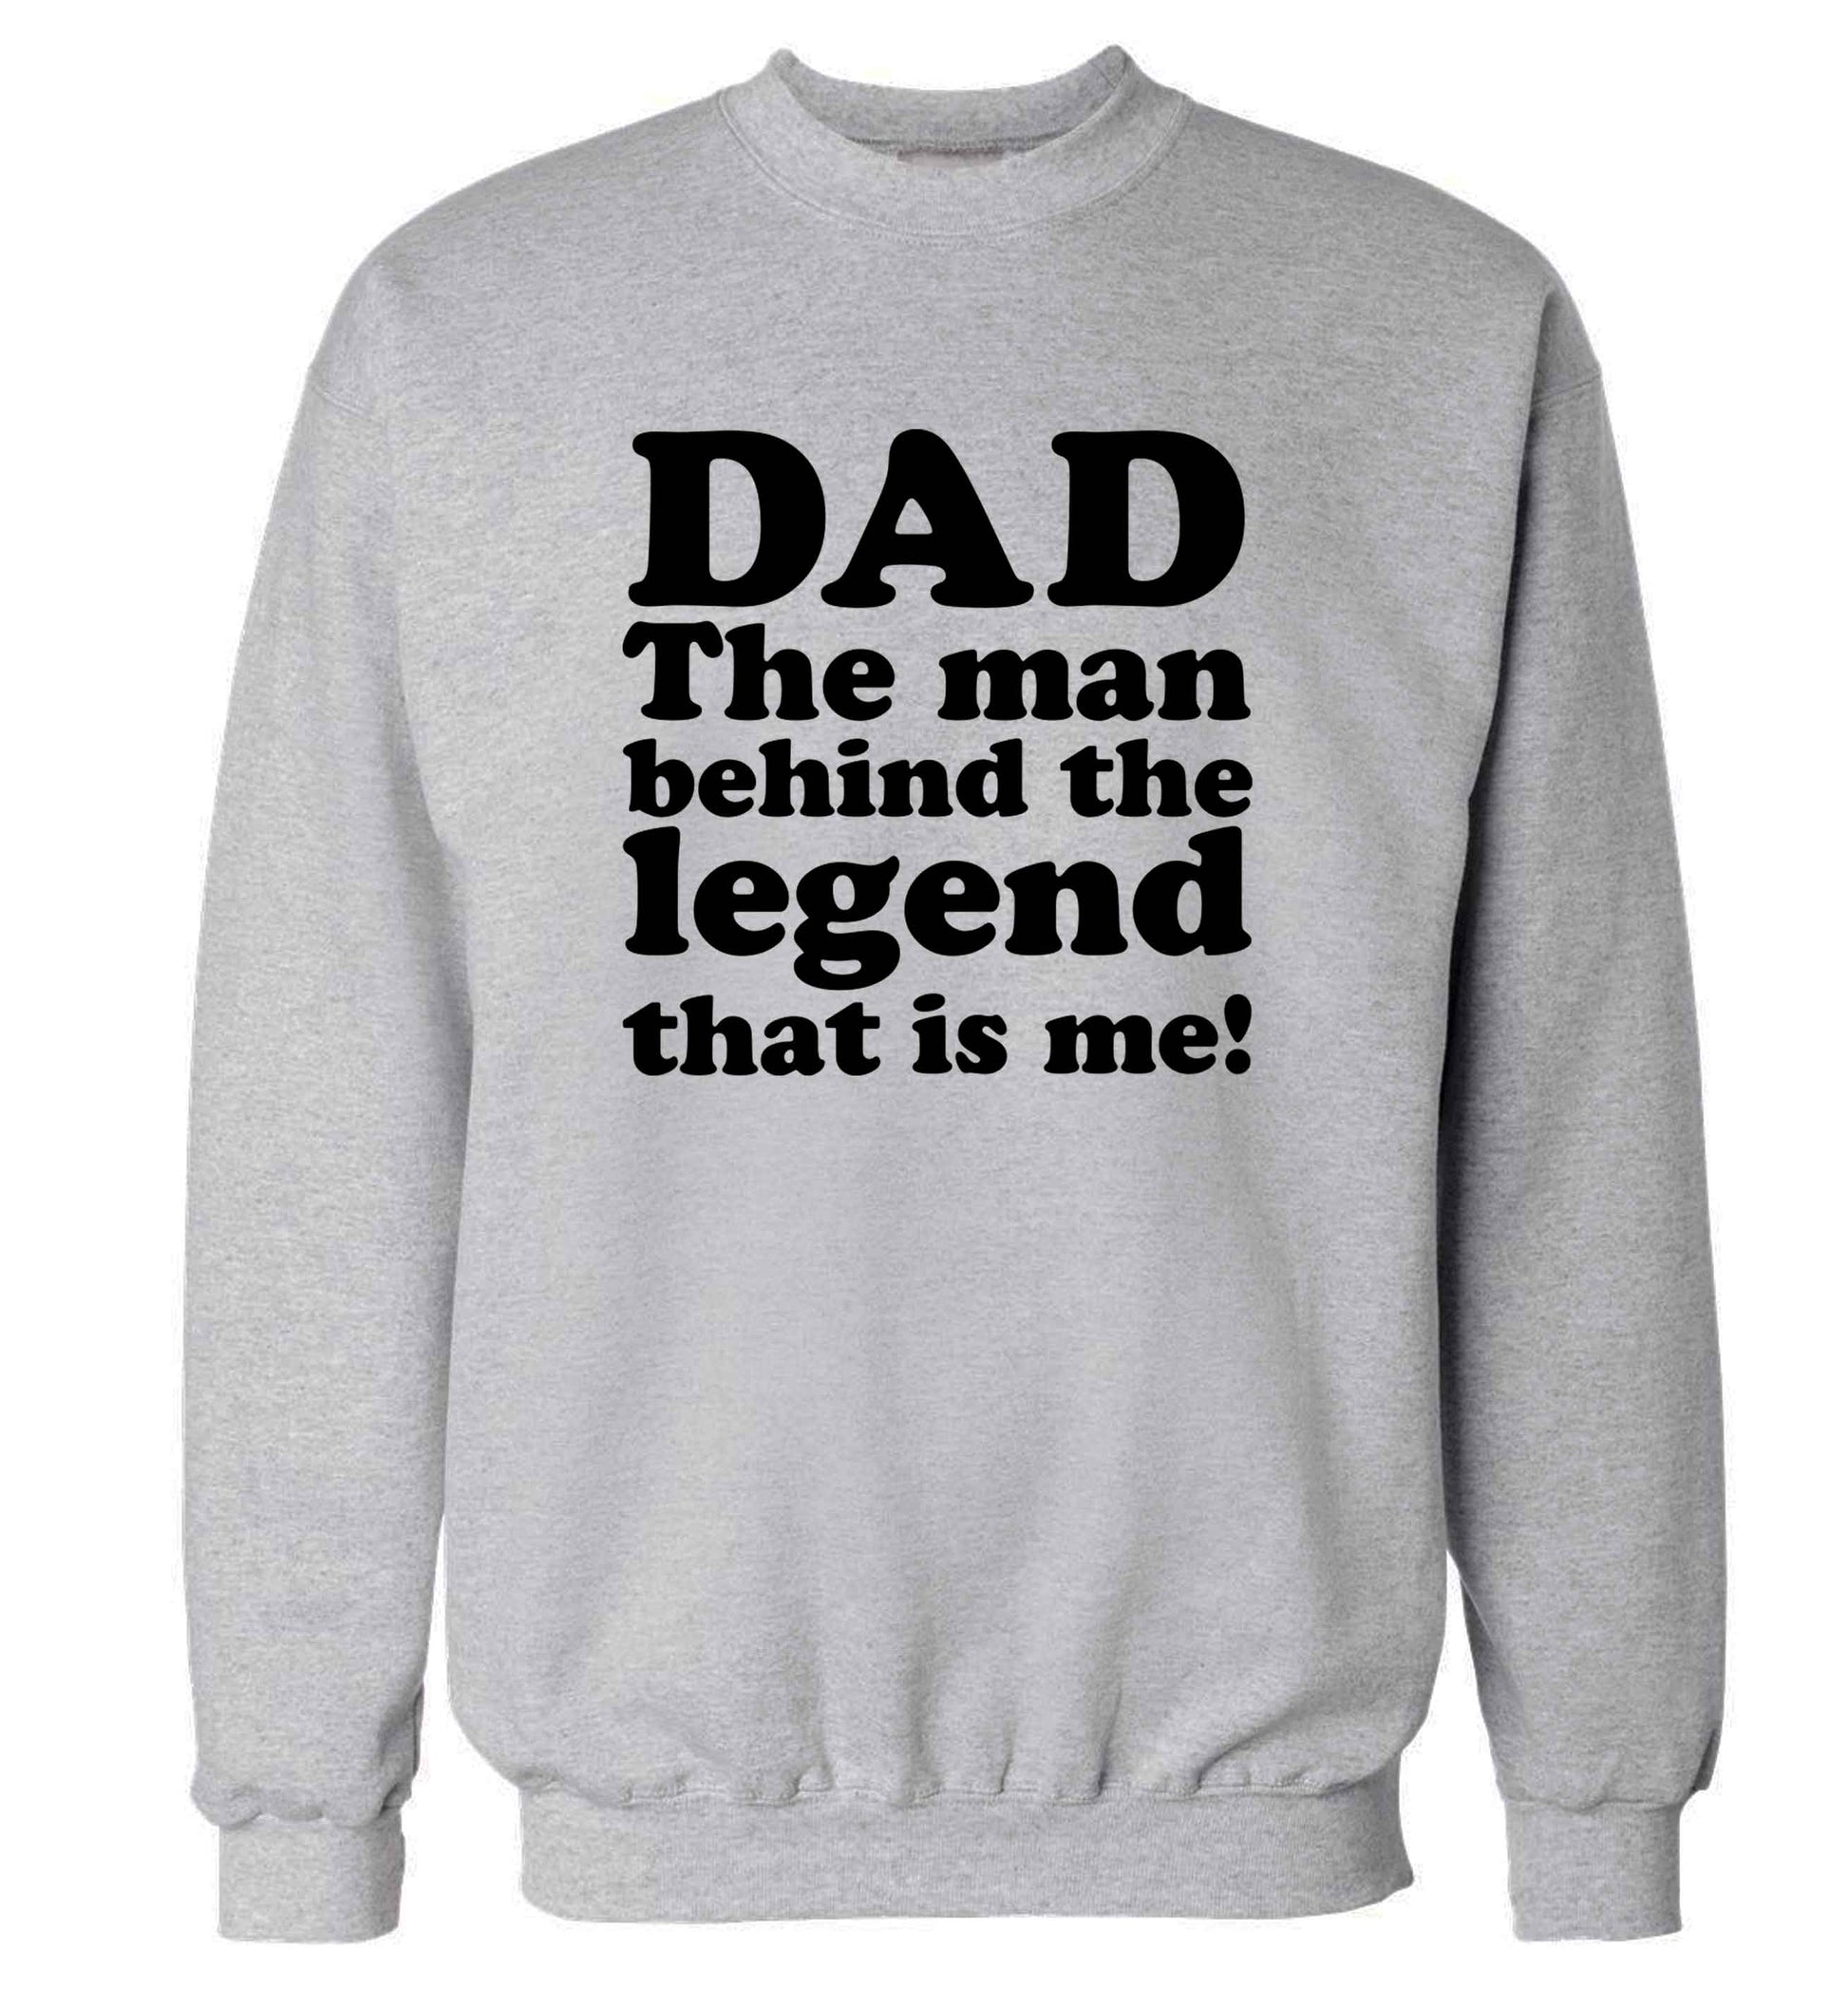 Dad the man behind the legend that is me adult's unisex grey sweater 2XL